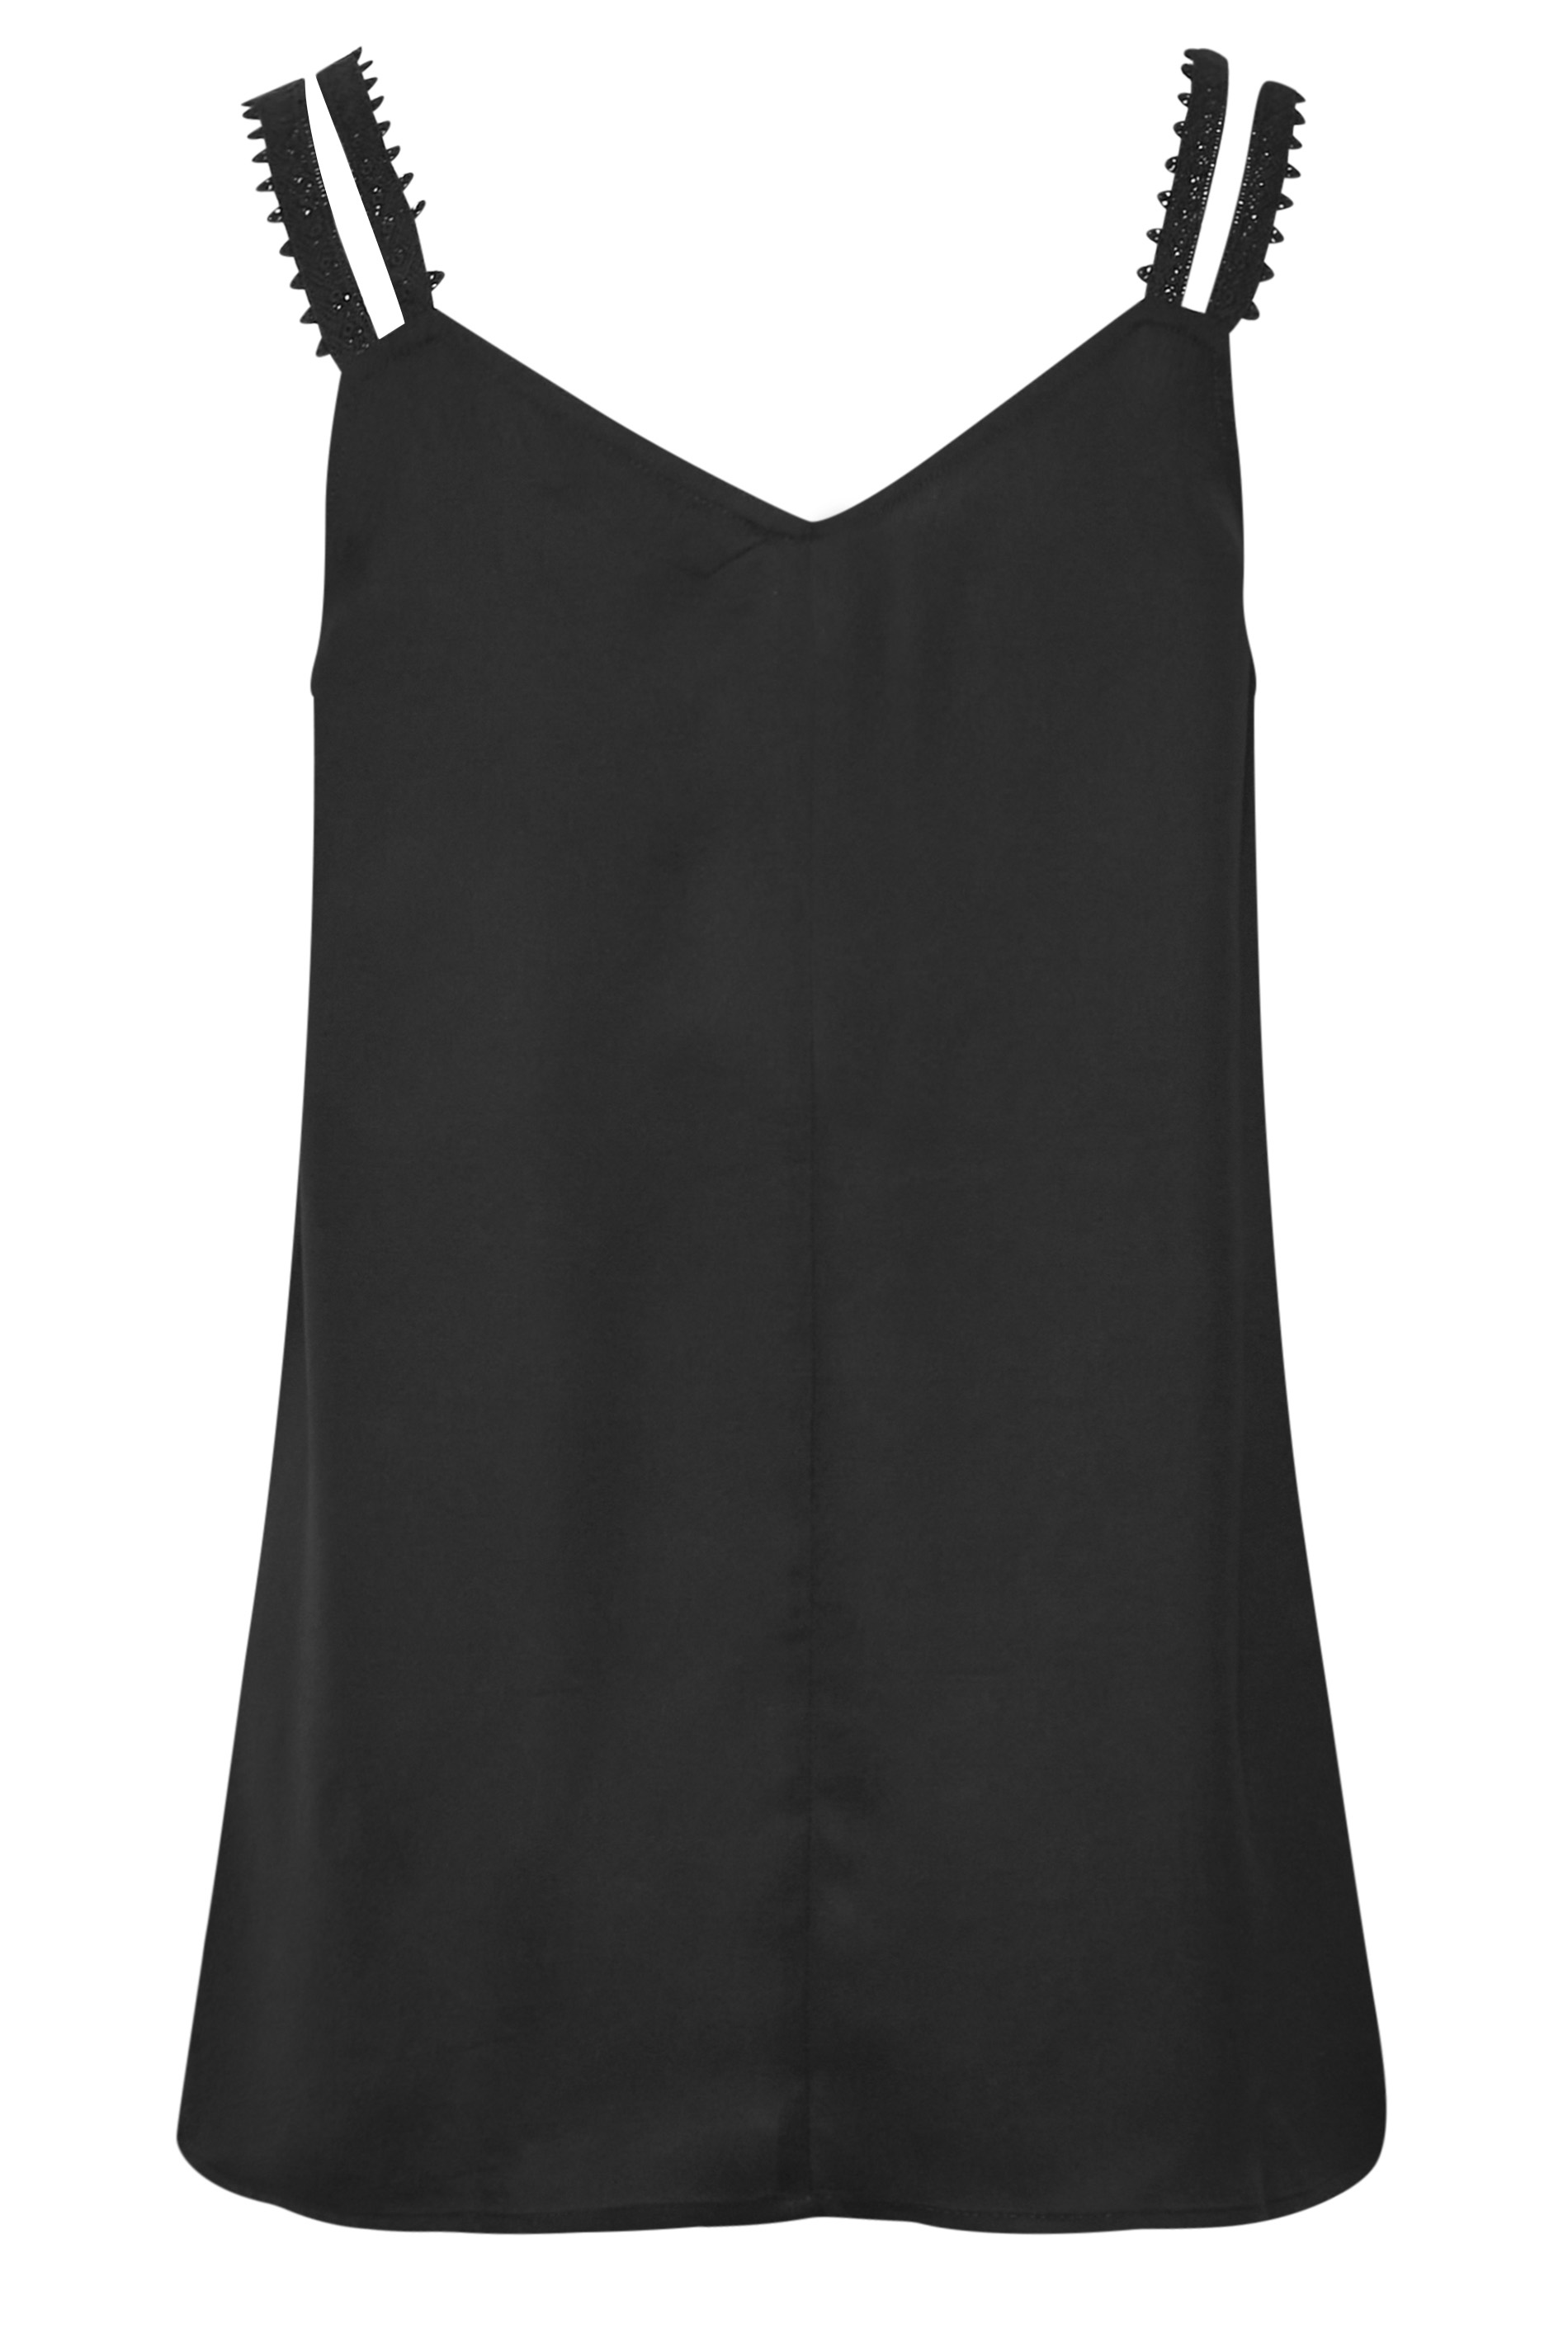 LIMITED COLLECTION Plus Size Black Embroidered Strap Vest Top | Yours ...